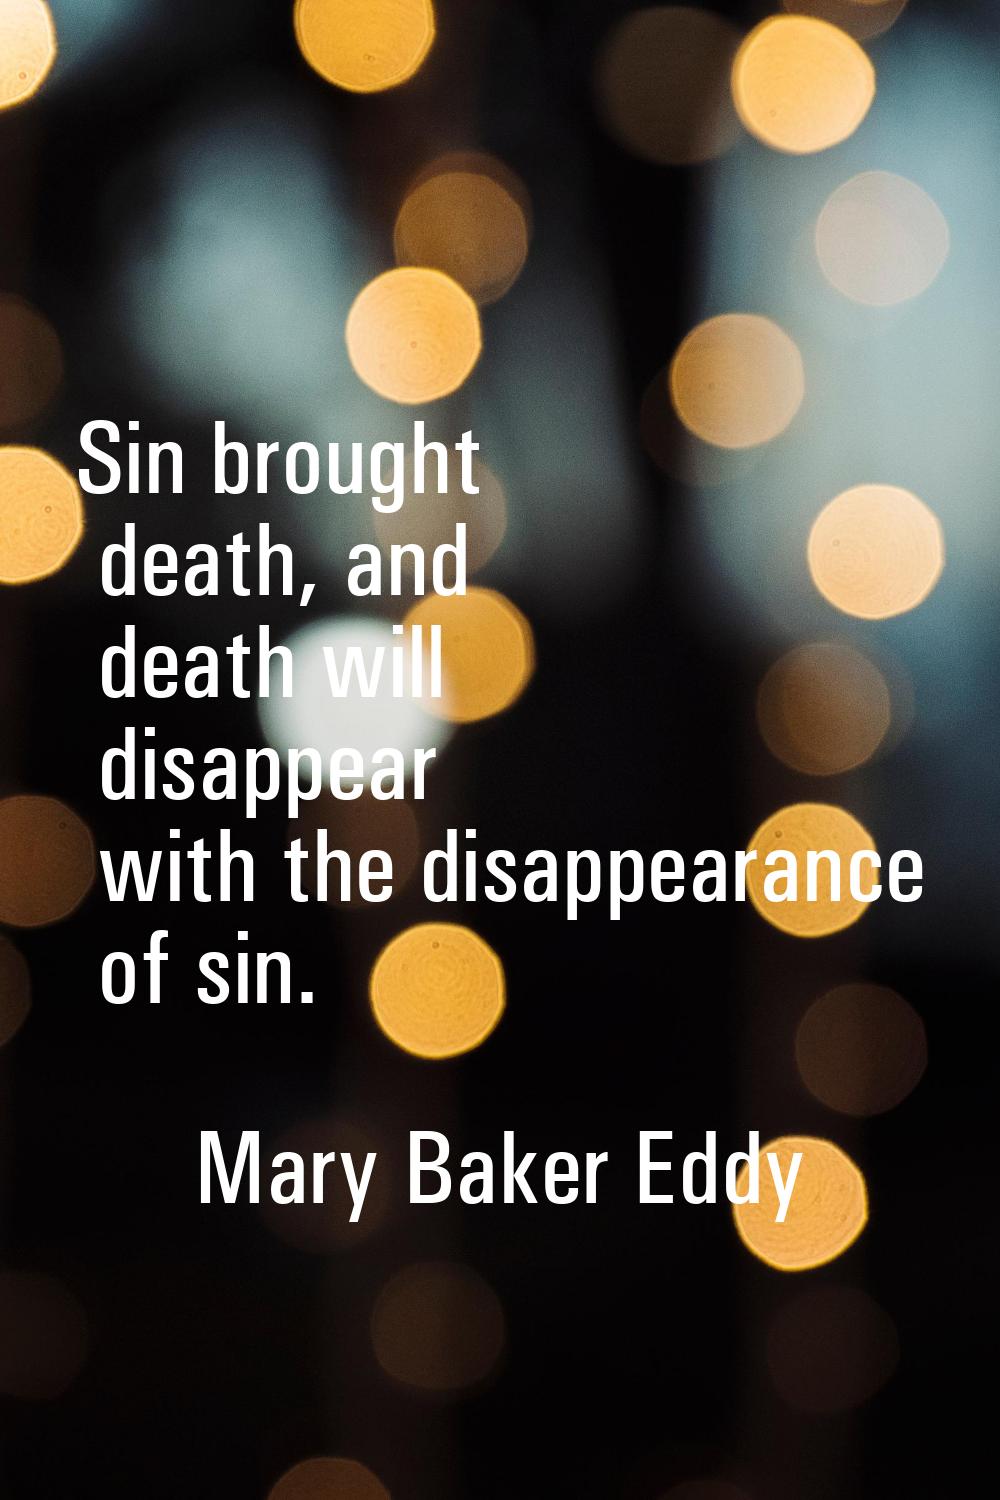 Sin brought death, and death will disappear with the disappearance of sin.